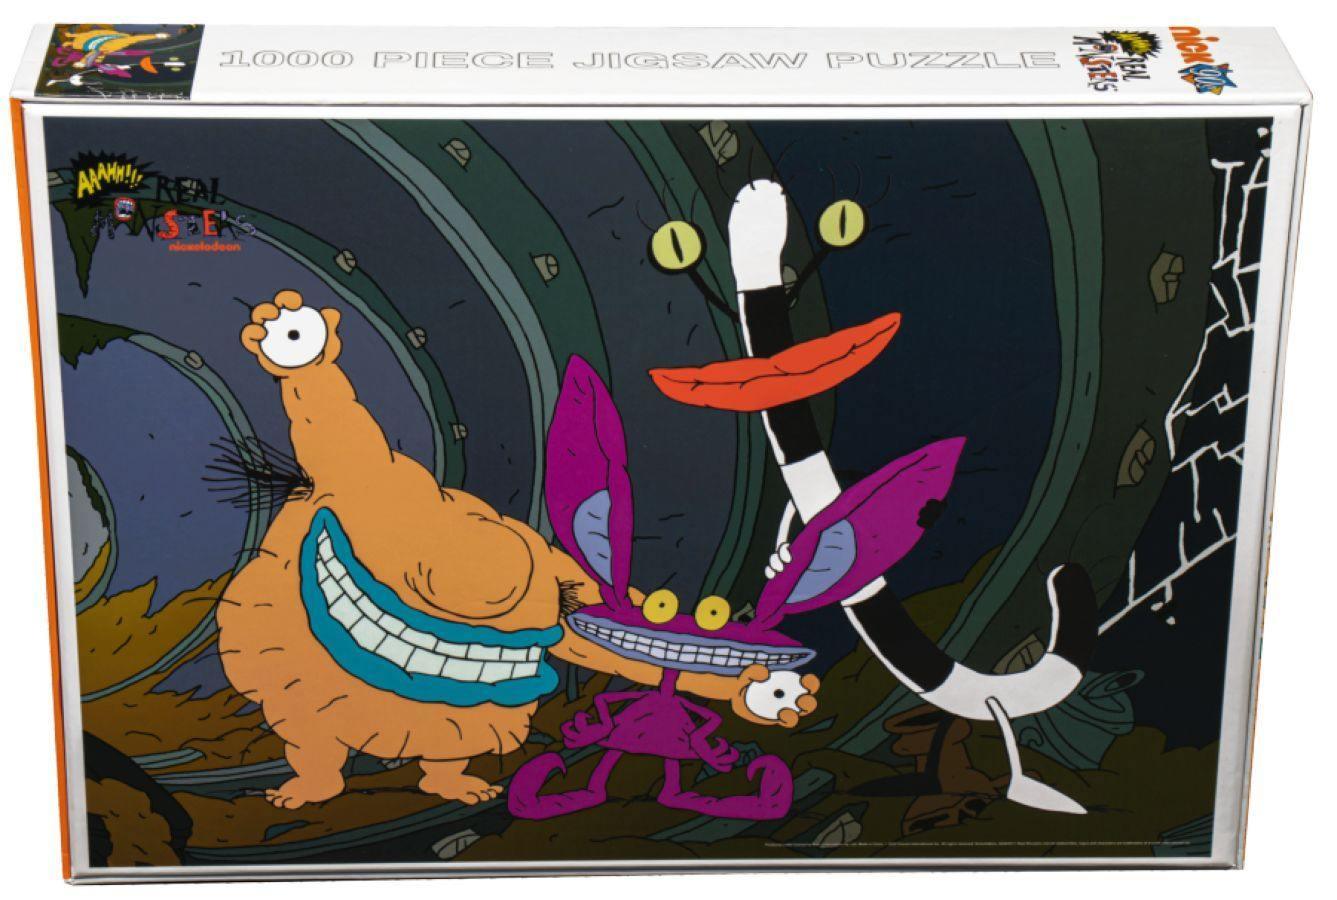 IKO1808 Aaahh!!! Real Monsters - Sewer Tunnel 1000 piece Jigsaw Puzzle - Ikon Collectables - Titan Pop Culture